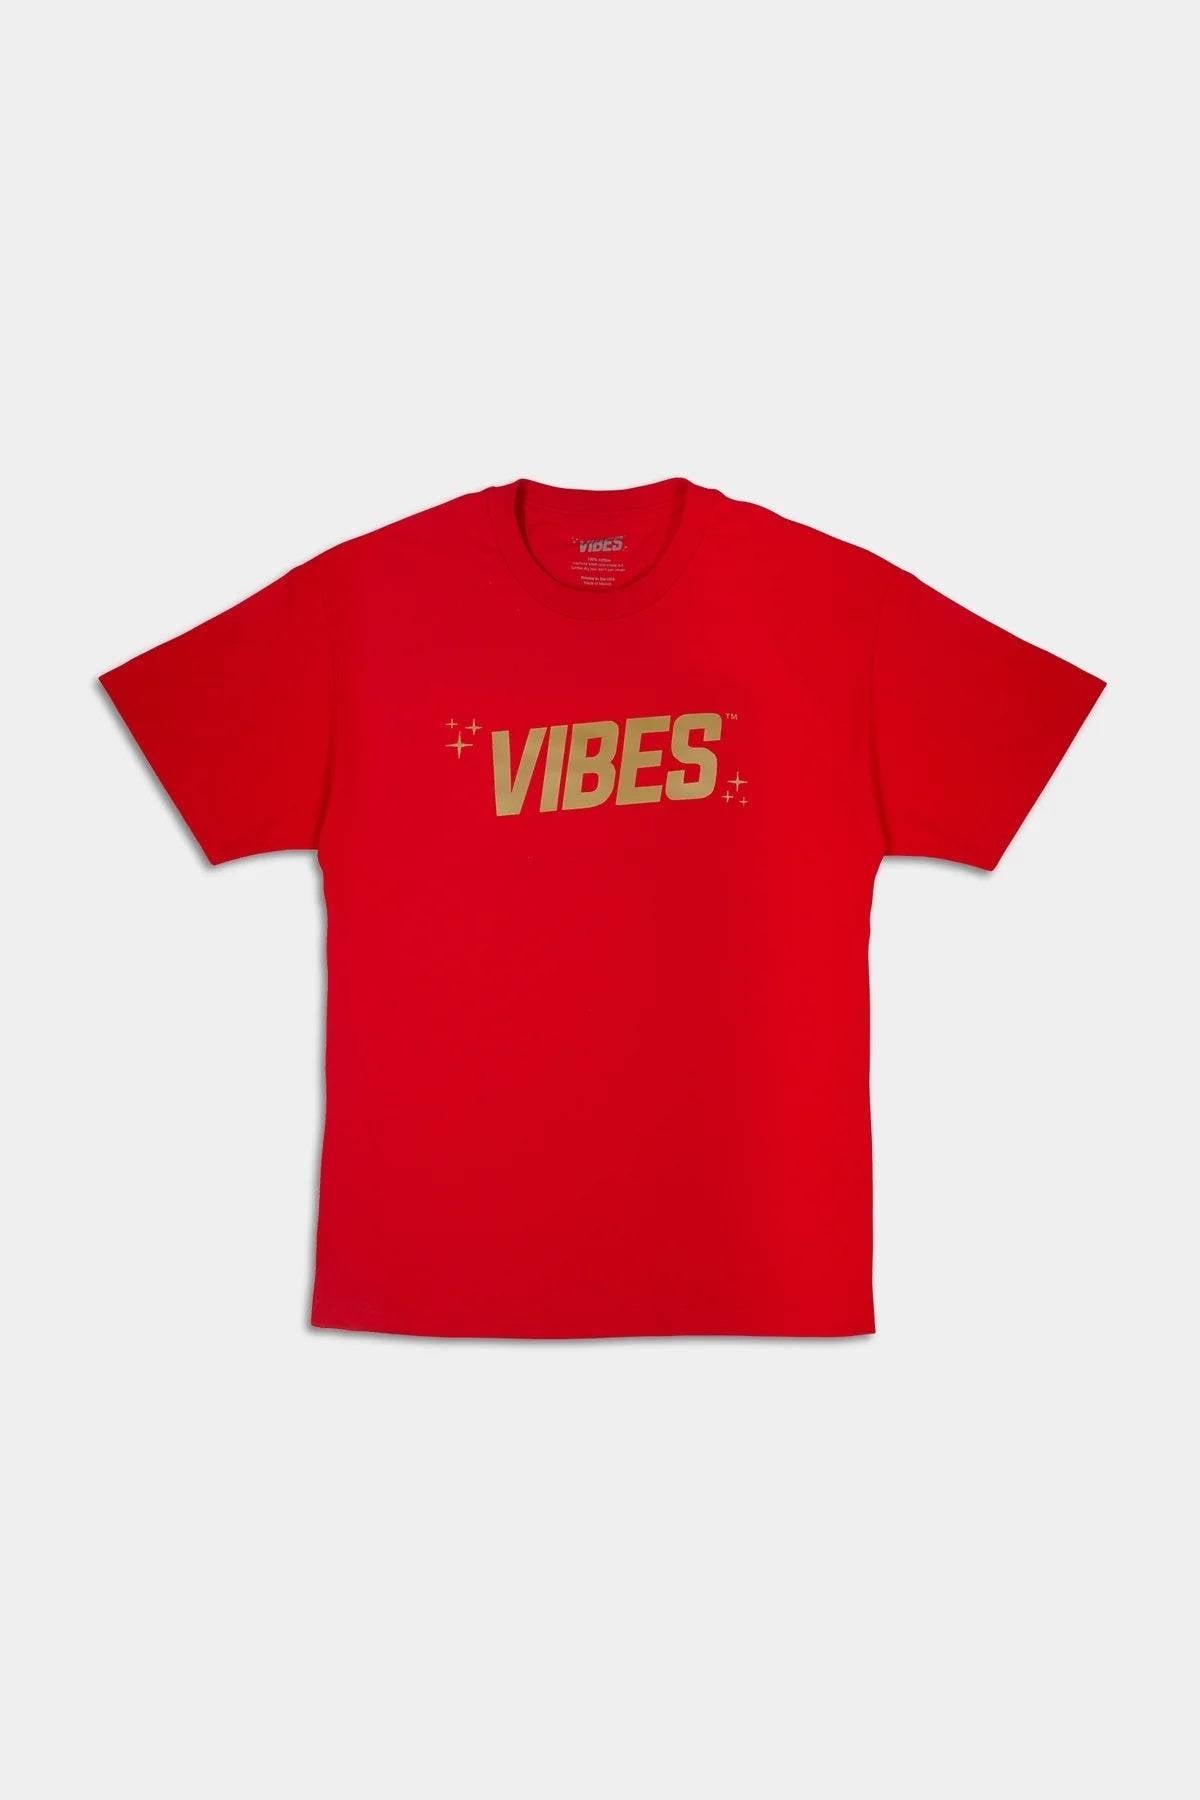 VIBES Red With Gold Logo T-Shirt Small